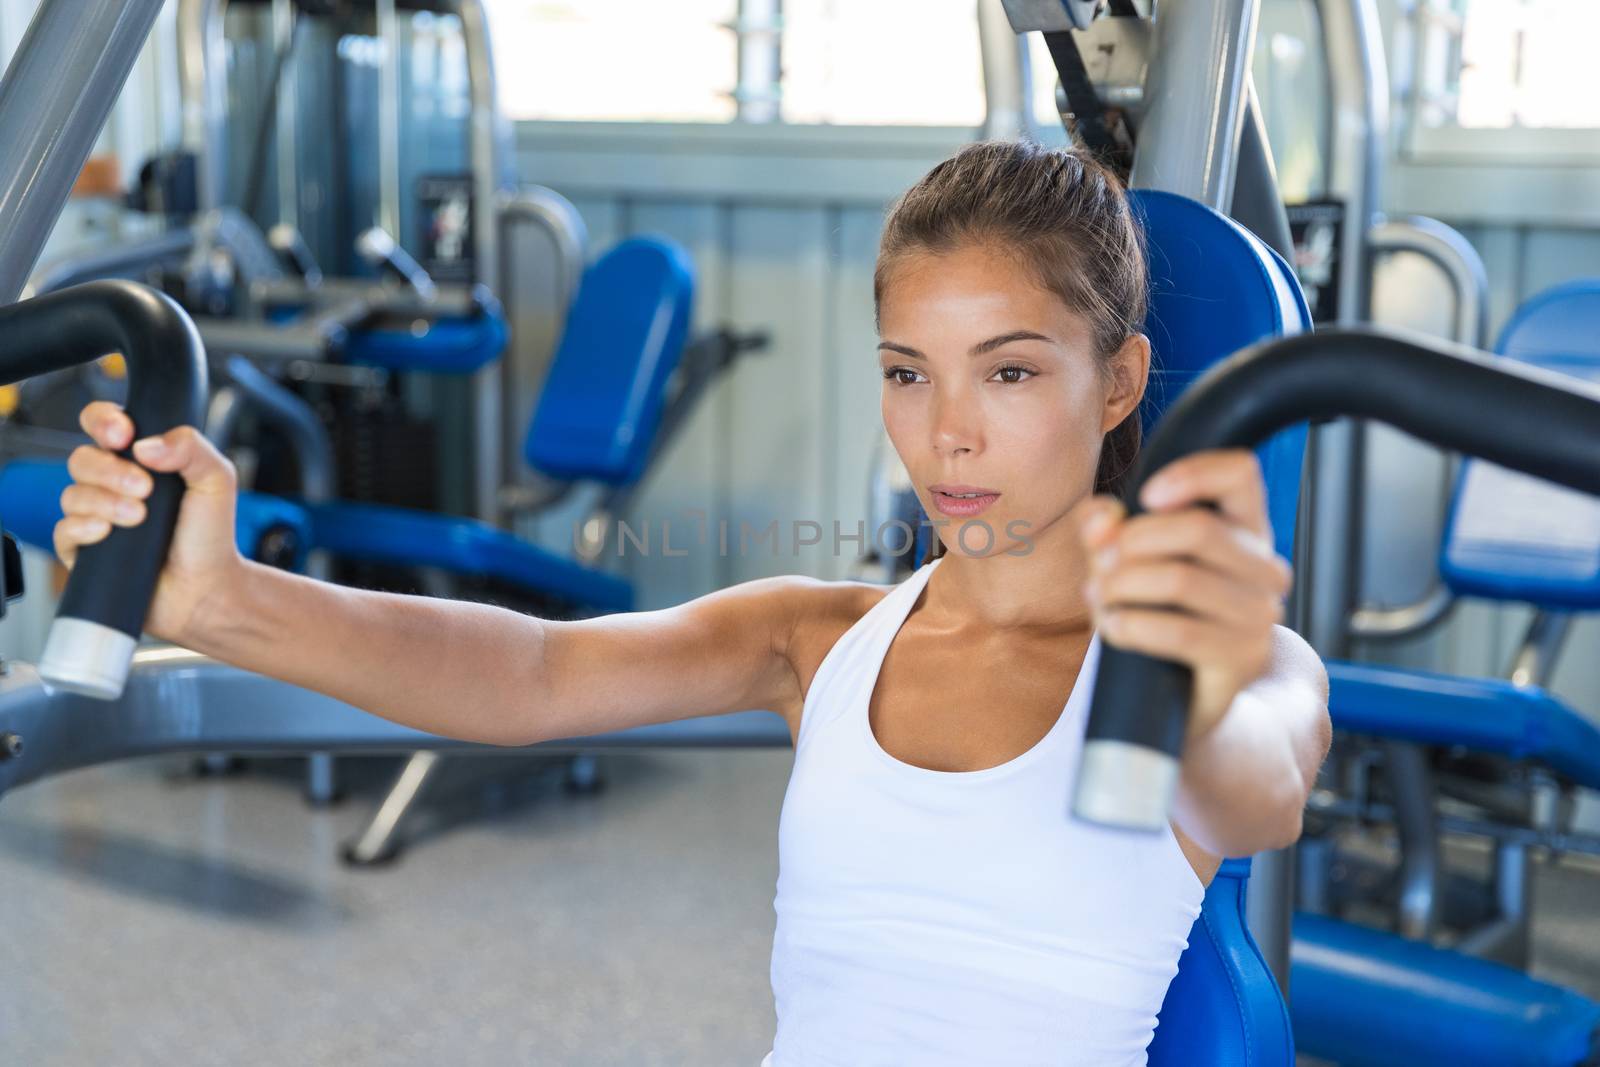 Gym workout Asian woman focused and motivated training on pec deck fly machine. Fitness workout.